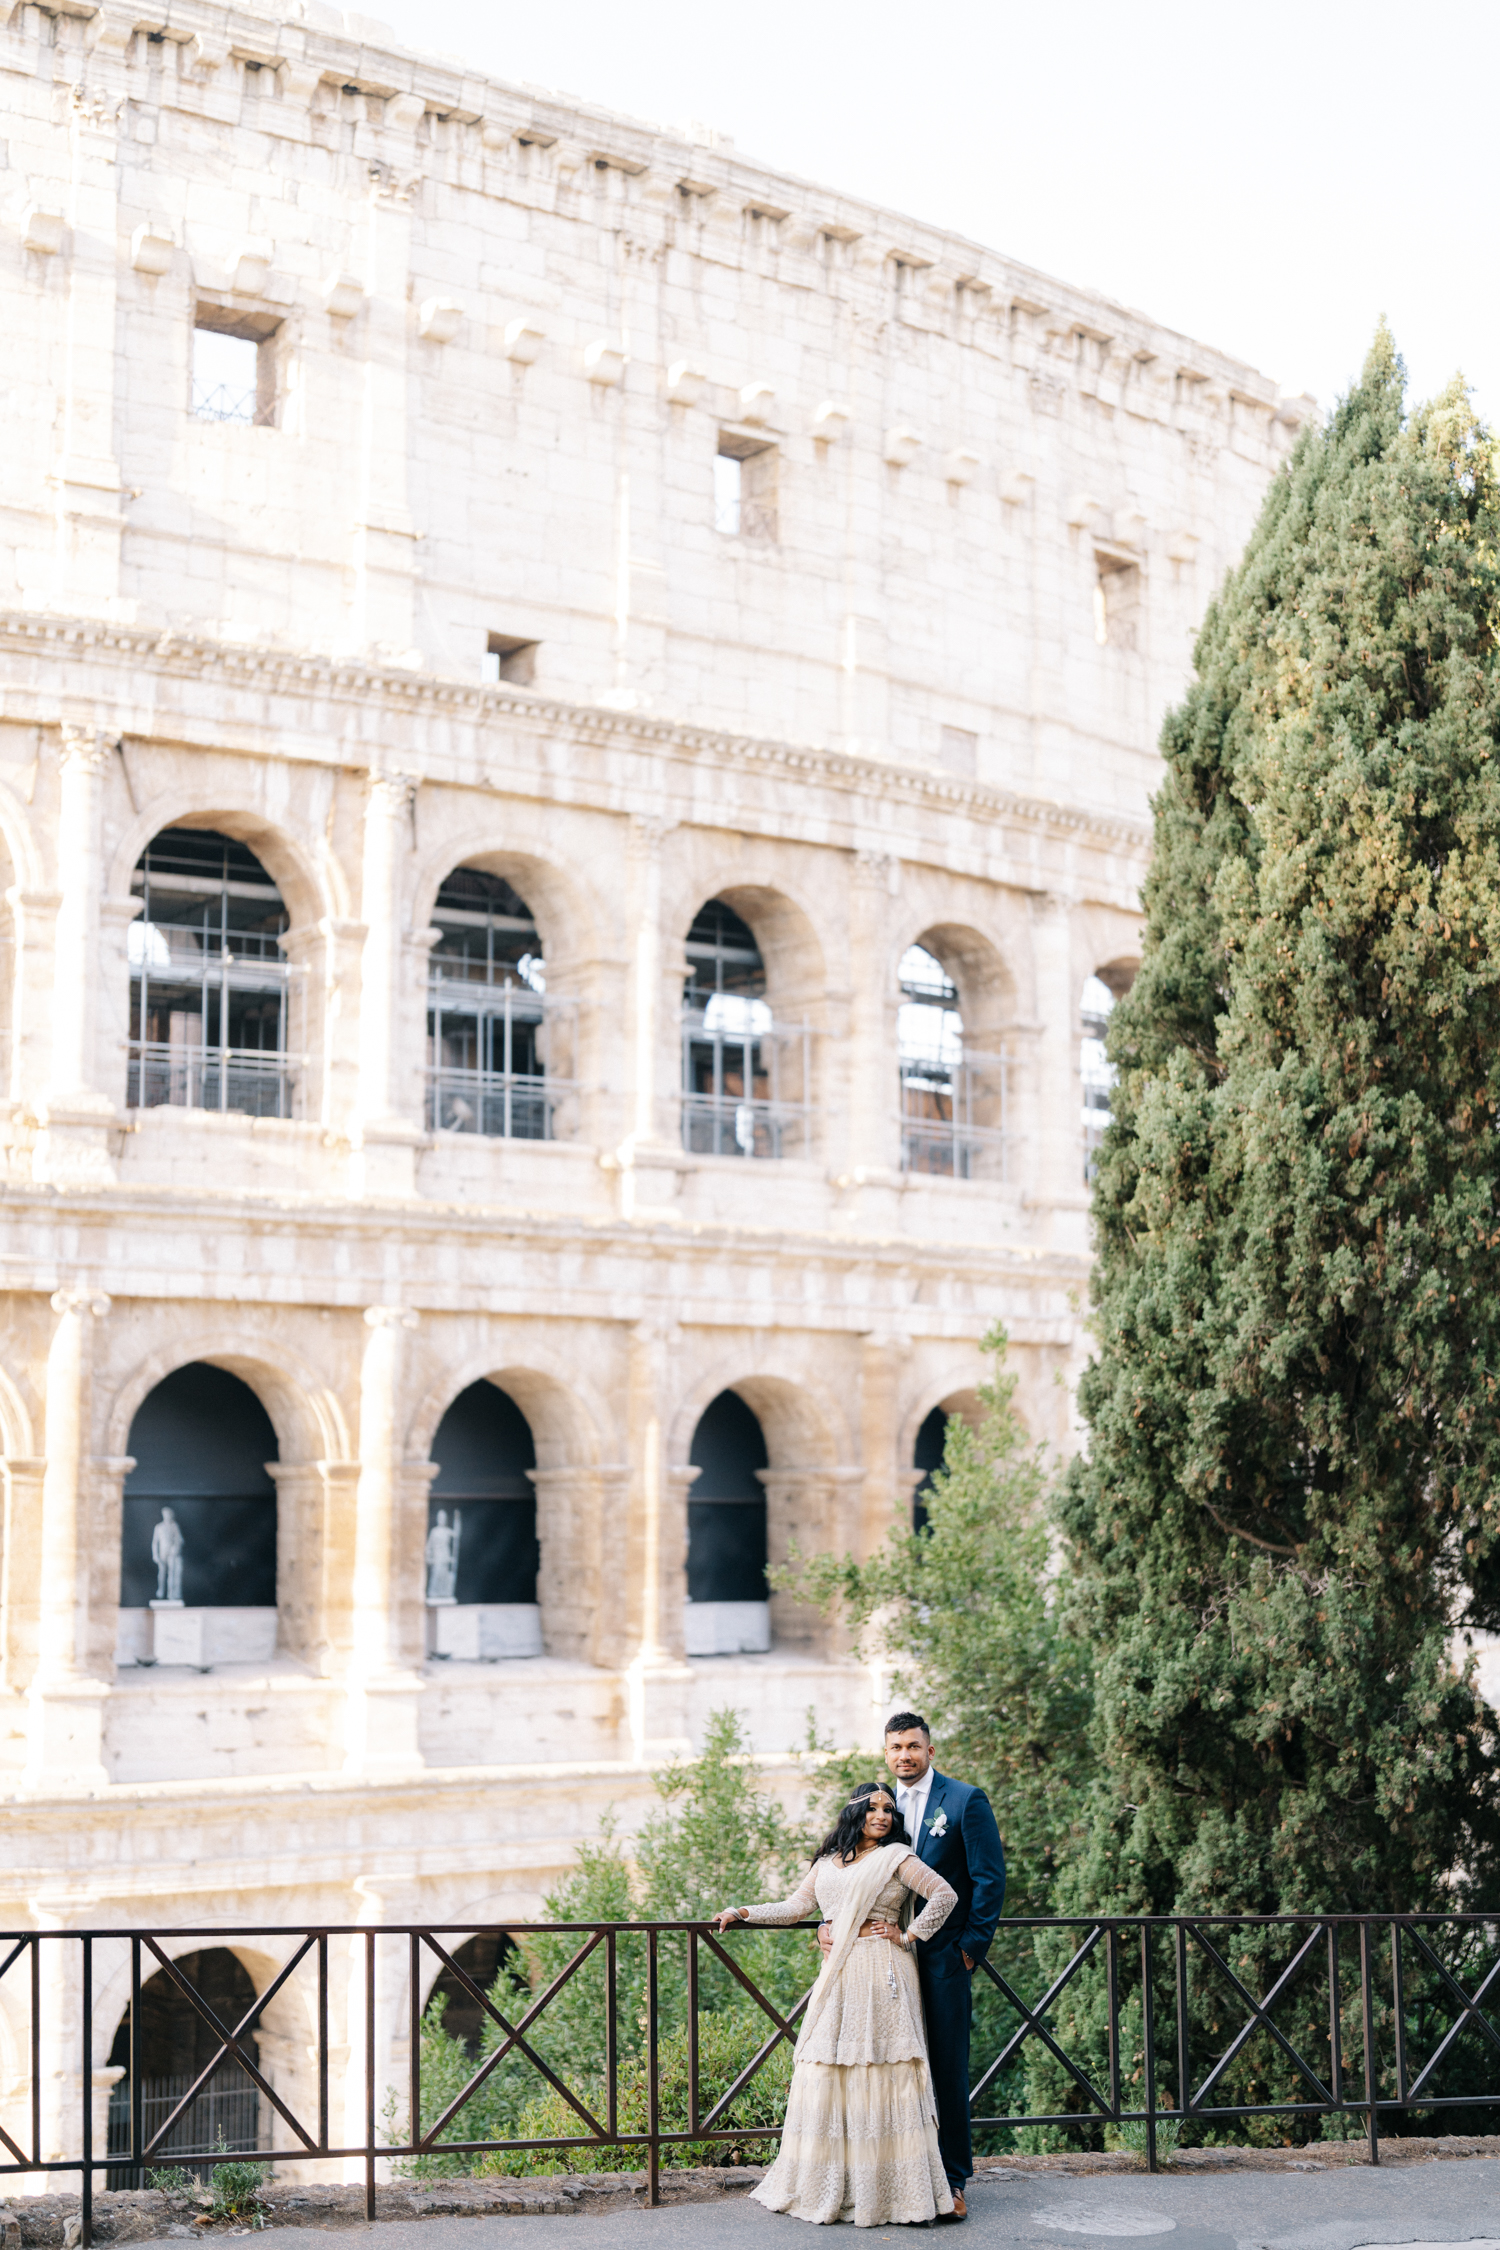 Where to take the best wedding and elopement photos in Italy? Alina Indi is a Venice and Rome wedding photographer. Book now.